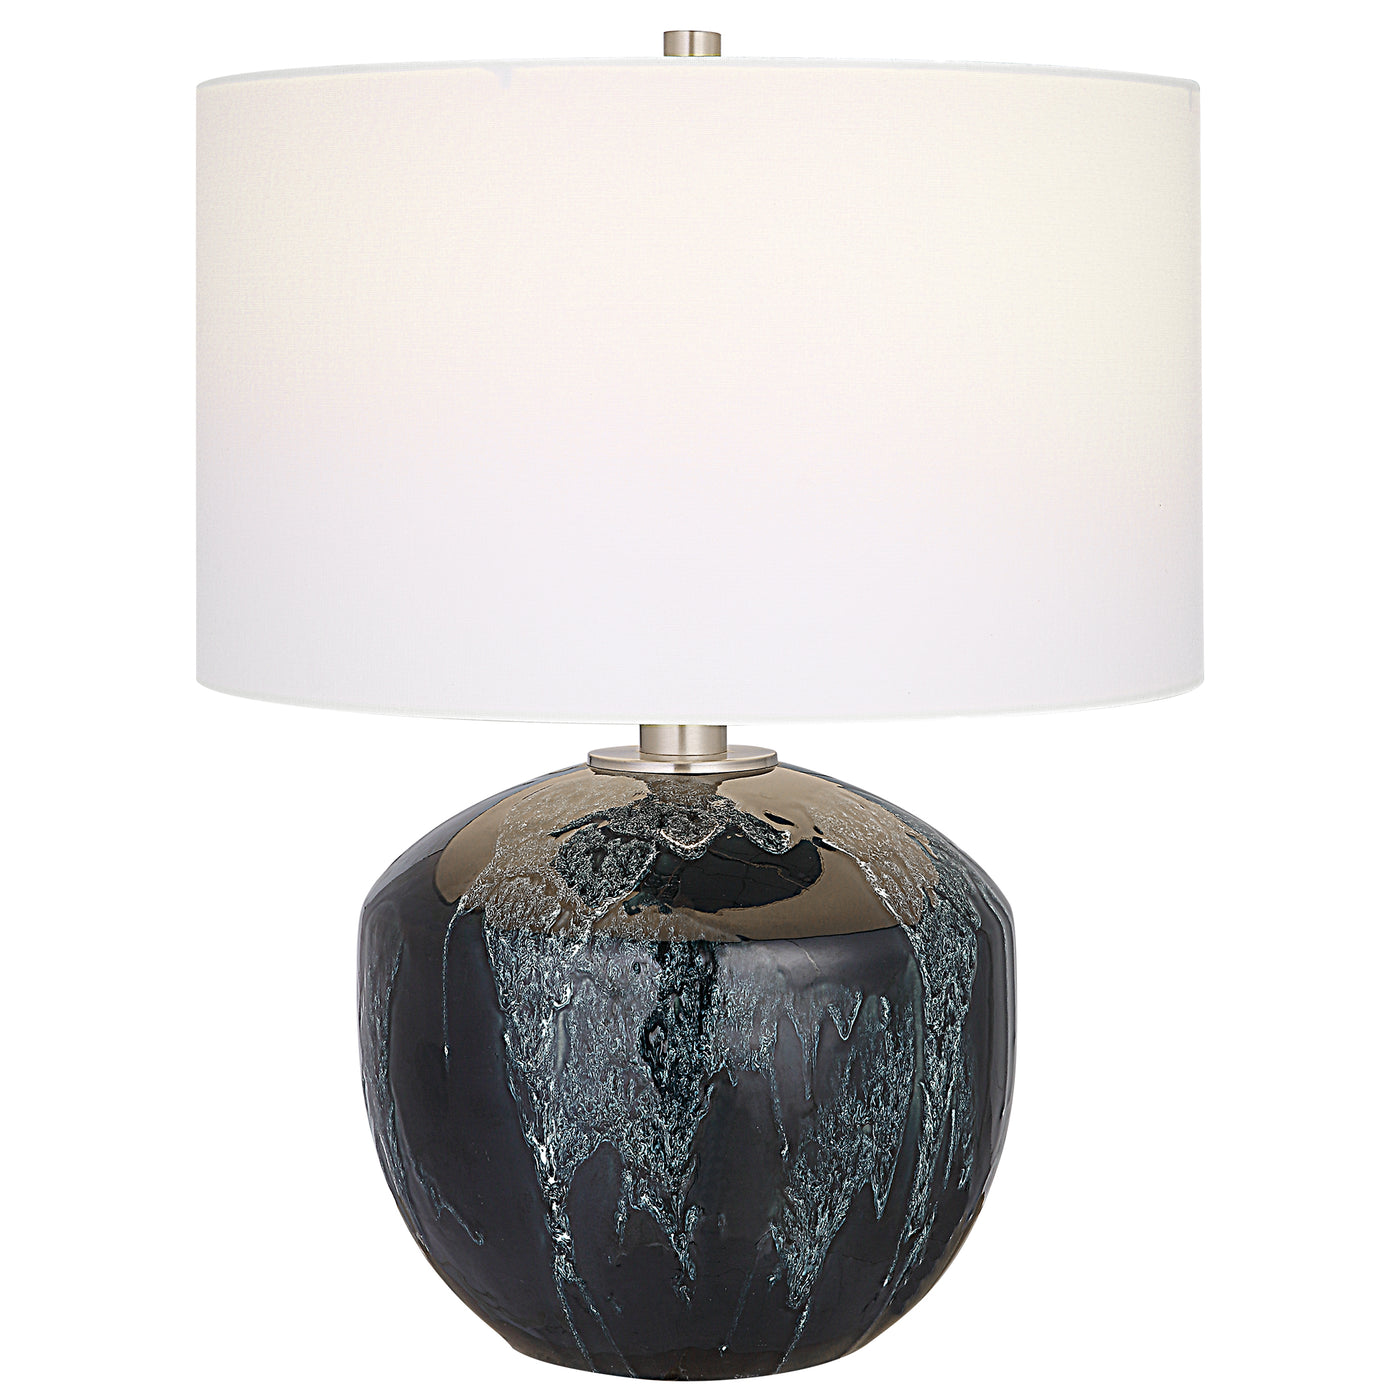 This Ceramic Table Lamp Features A Deep Emerald Green Drip Glaze With Subtle Ivory Undertones Paired With Brushed Nickel P...